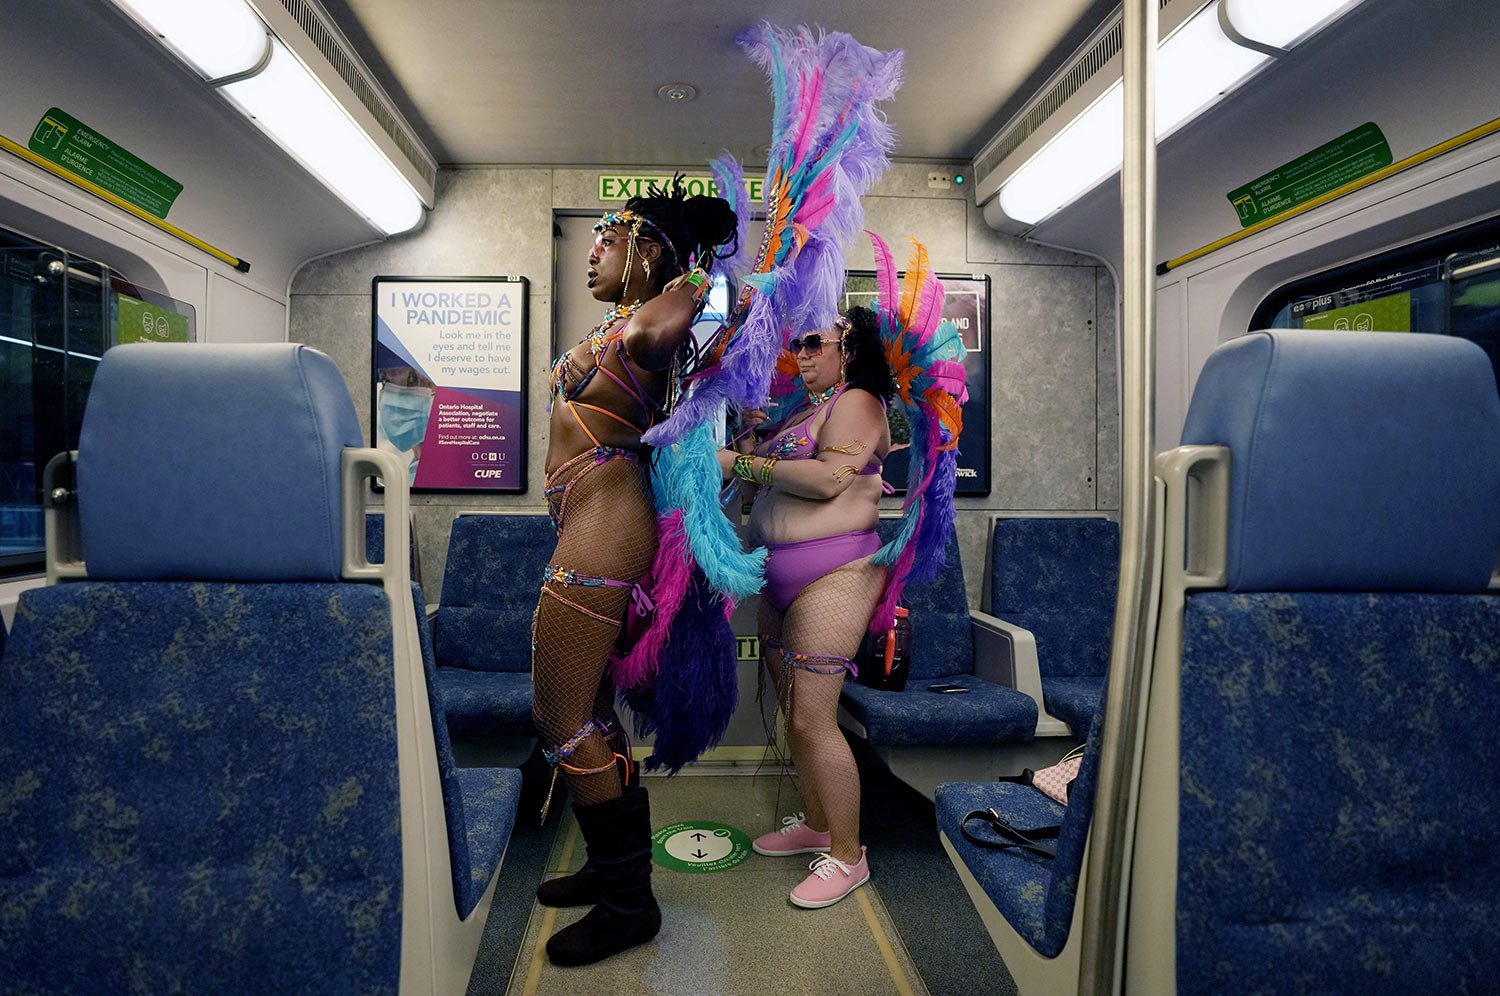  Missy, right, adjusts her friend Sasha’s costume as they ride the train to the Caribbean Carnival parade in Toronto, Canada, Saturday, July 30, 2022. (AP Photo/Kamran Jebreili) 